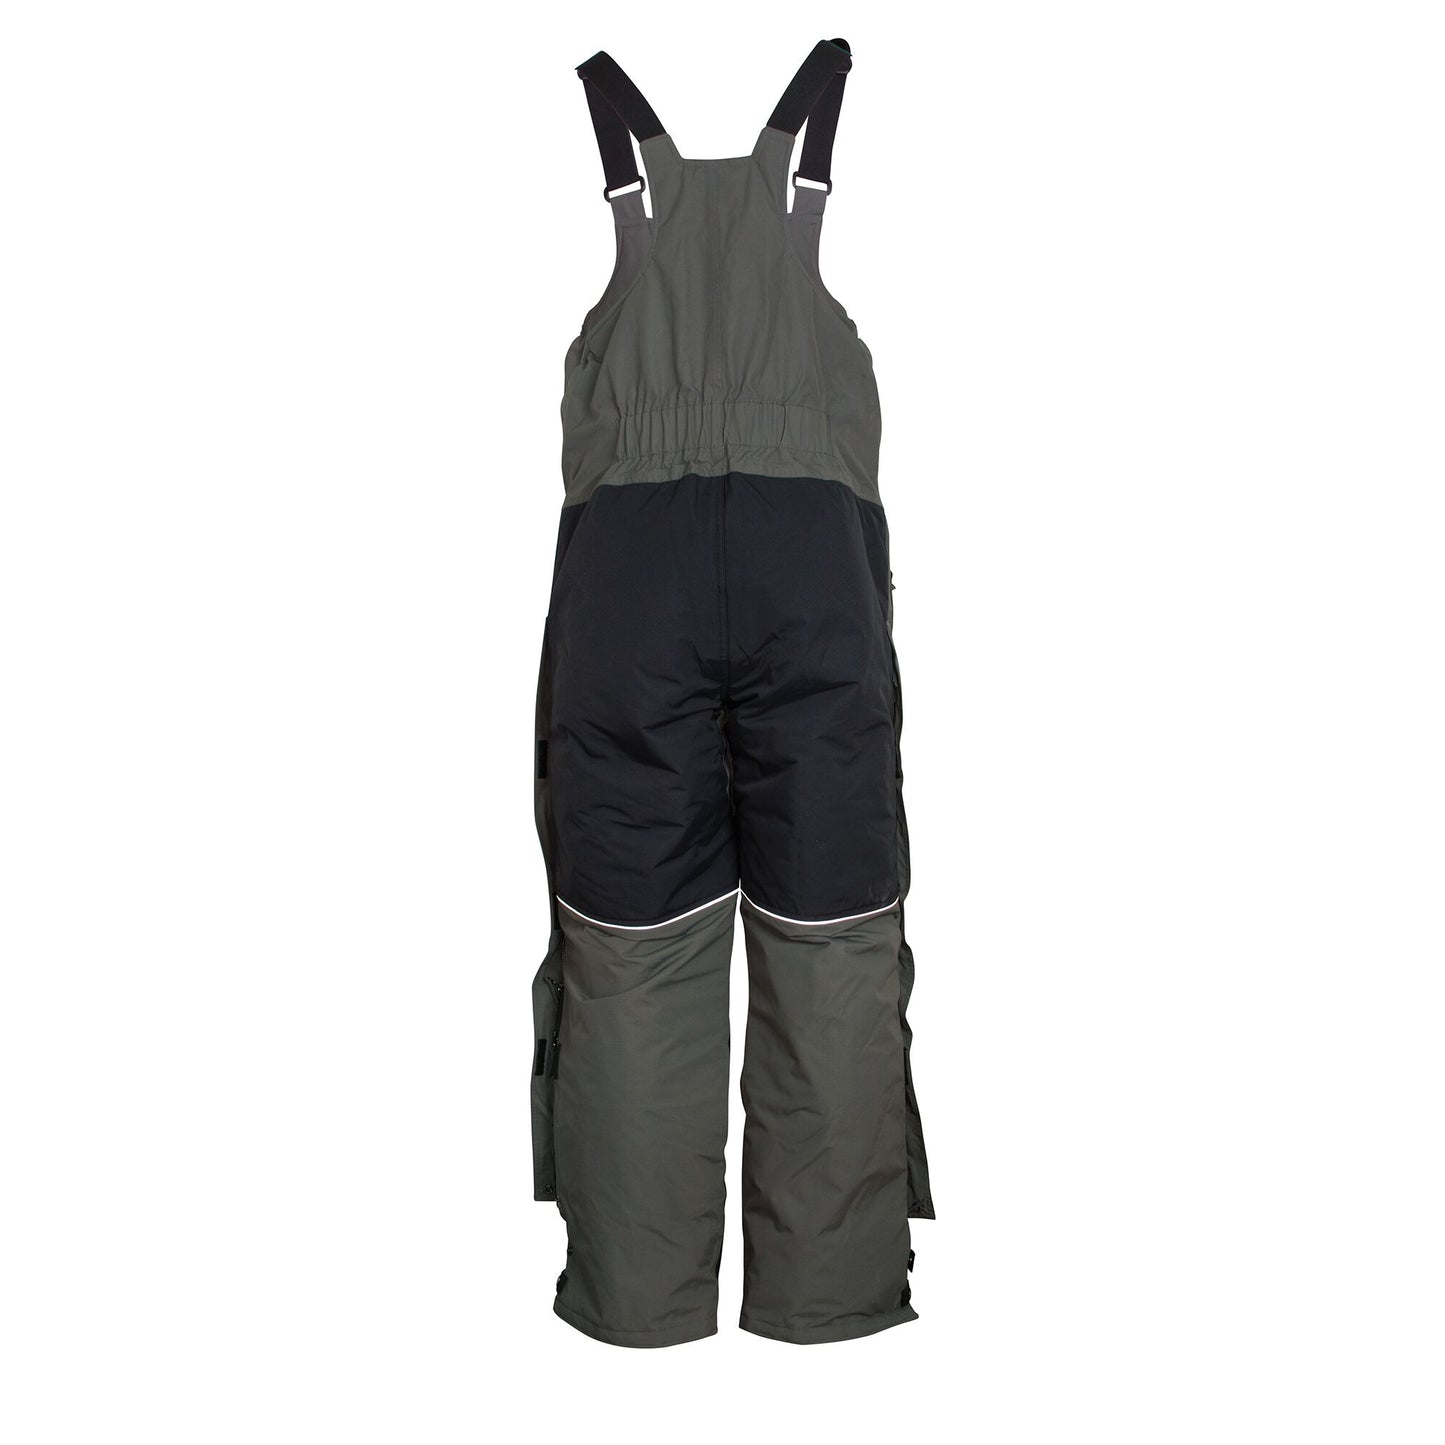 WindRider Ice Fishing Suit | Insulated Bibs and Jacket | Flotation | Tons  of Pockets | Adjustable Inseam | Reflective Piping | Waterproof Gear for  Ice